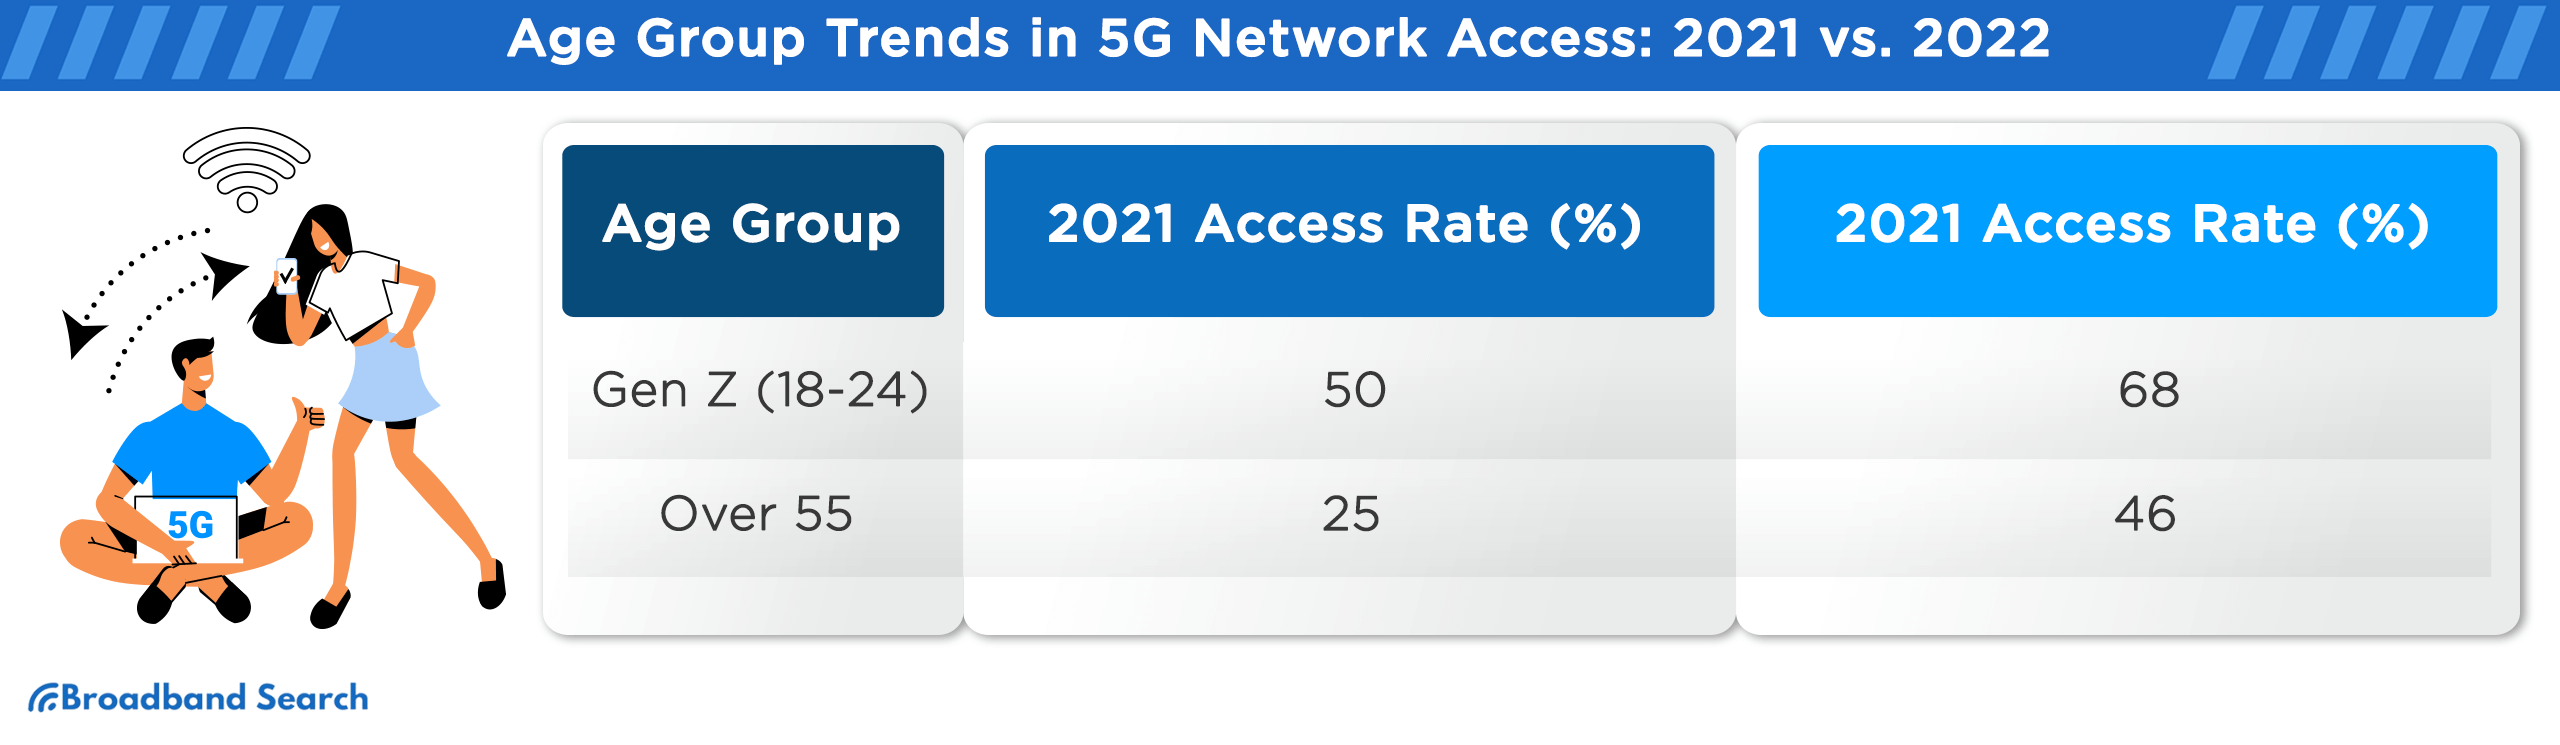 Age Group Trends in 5G Network Access in in 2021 vs 2022